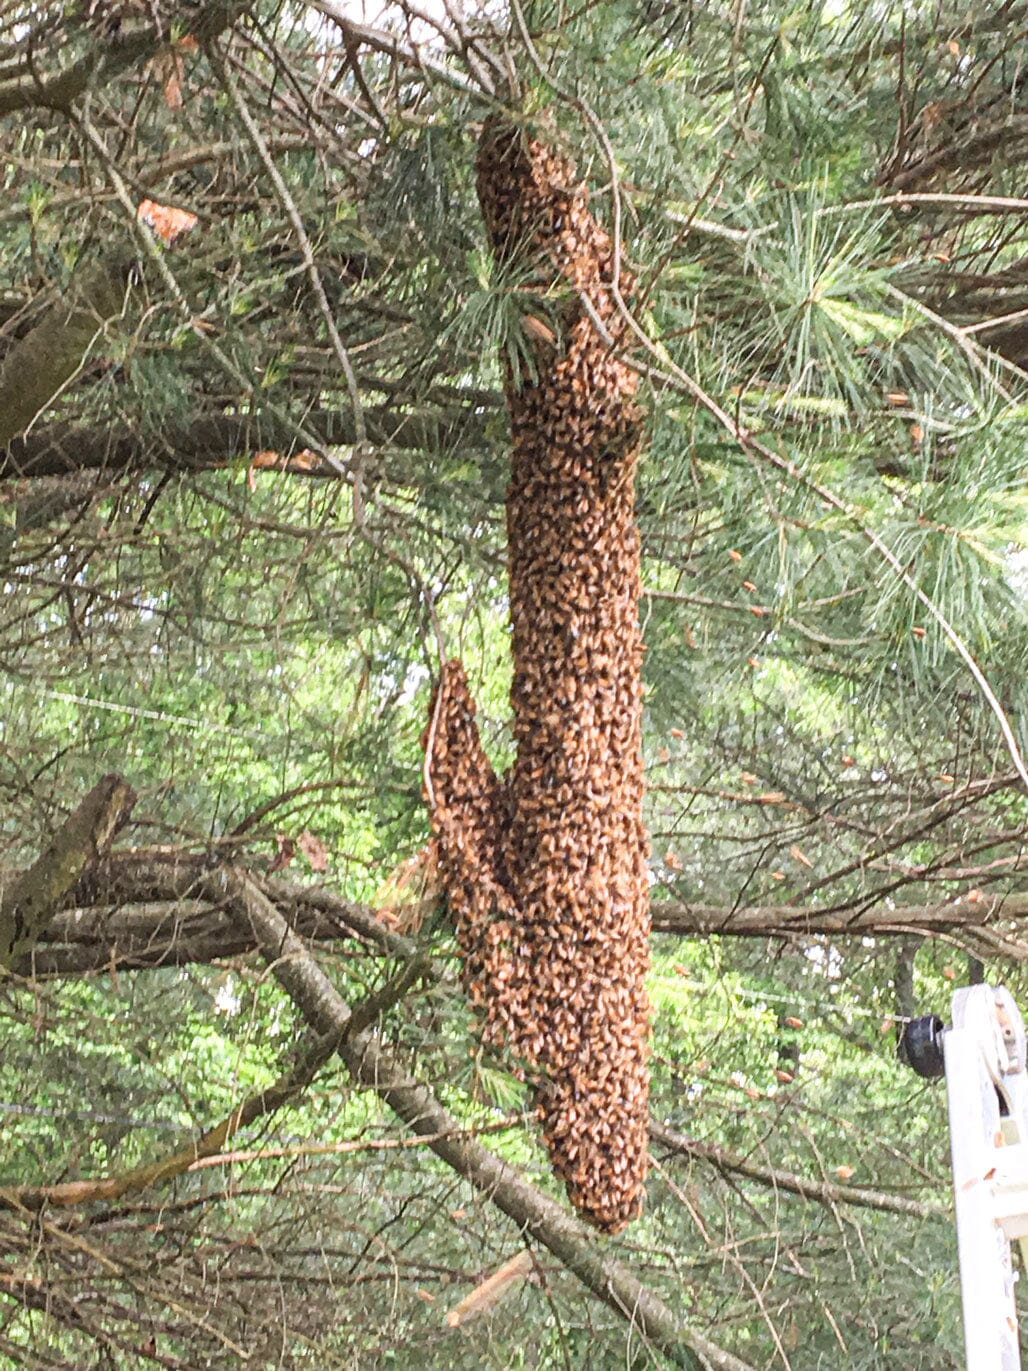 What Makes Bees Swarm?